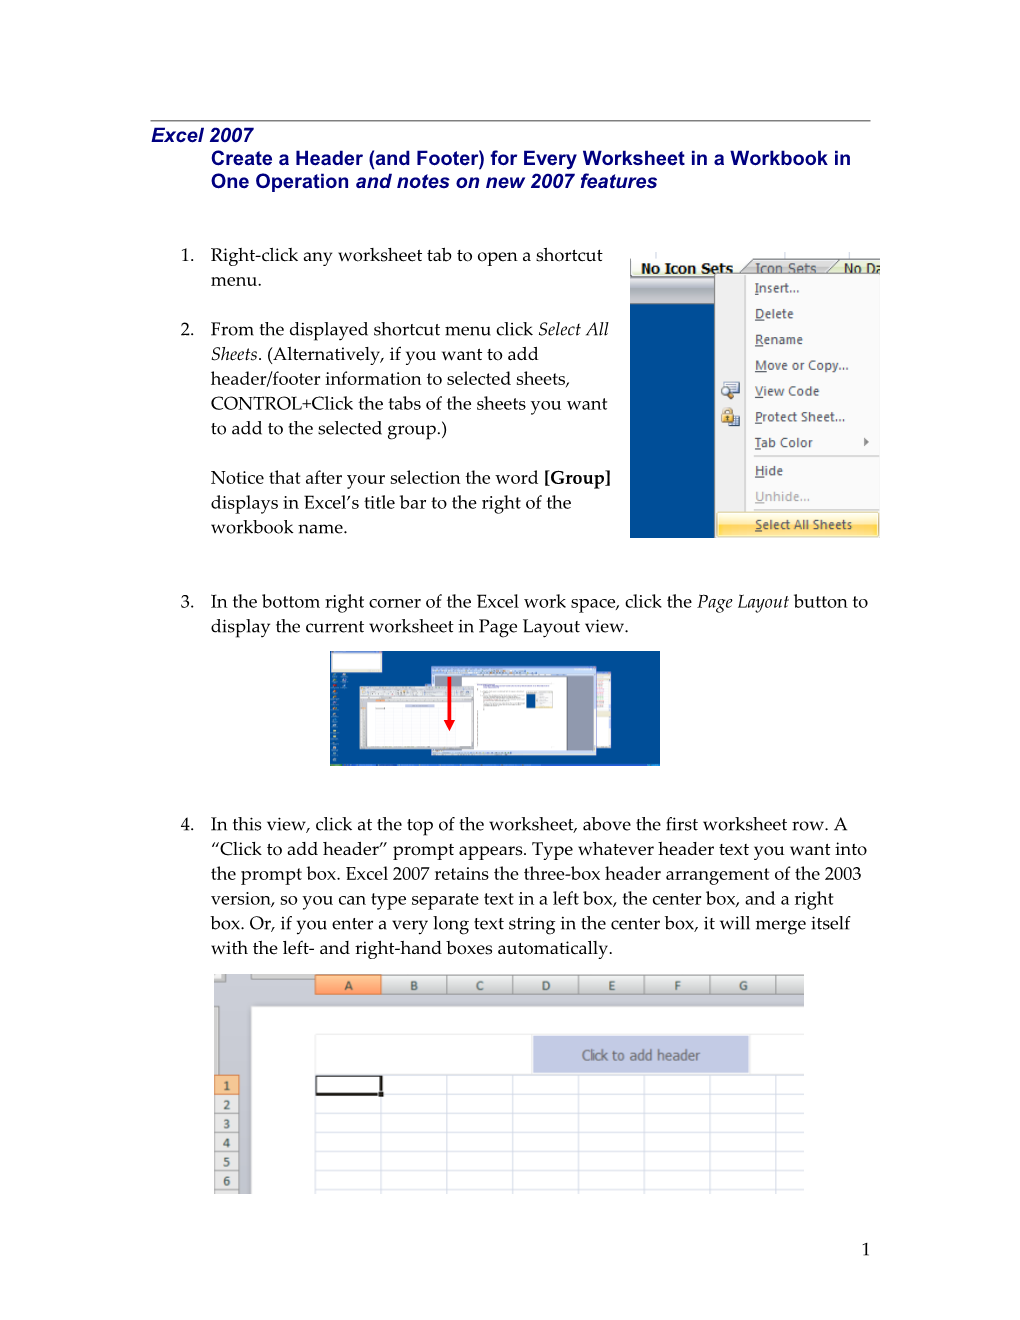 Create a Header (And Footer) for Every Worksheet in a Workbook in One Operation and Notes